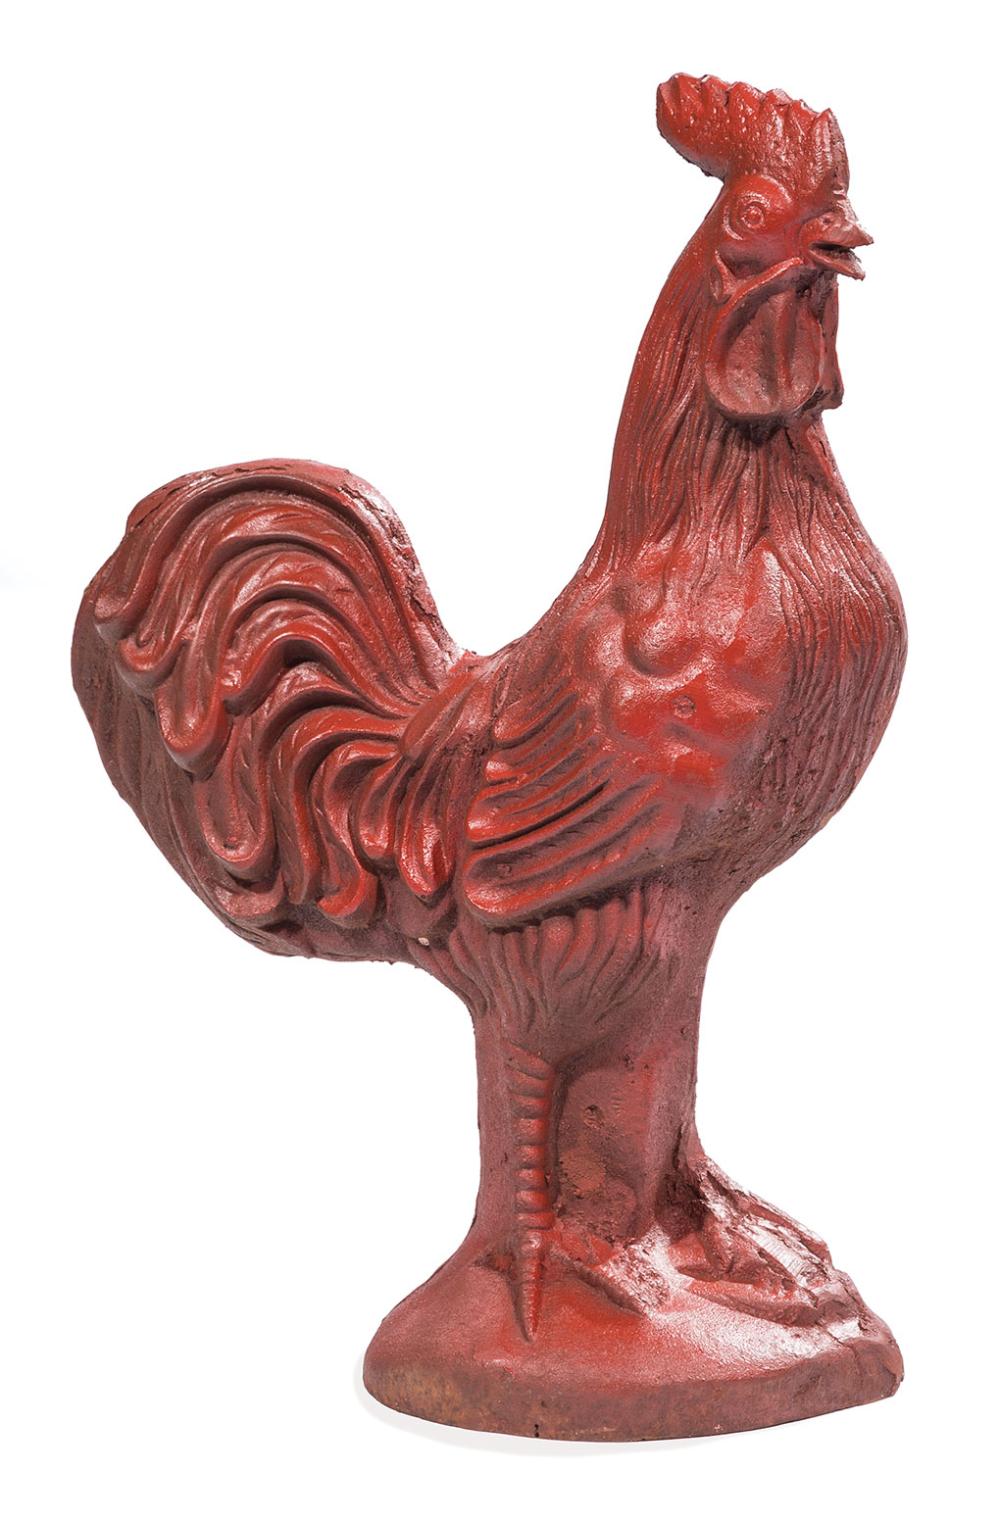 CAST IRON GARDEN FIGURE OF A ROOSTERCast